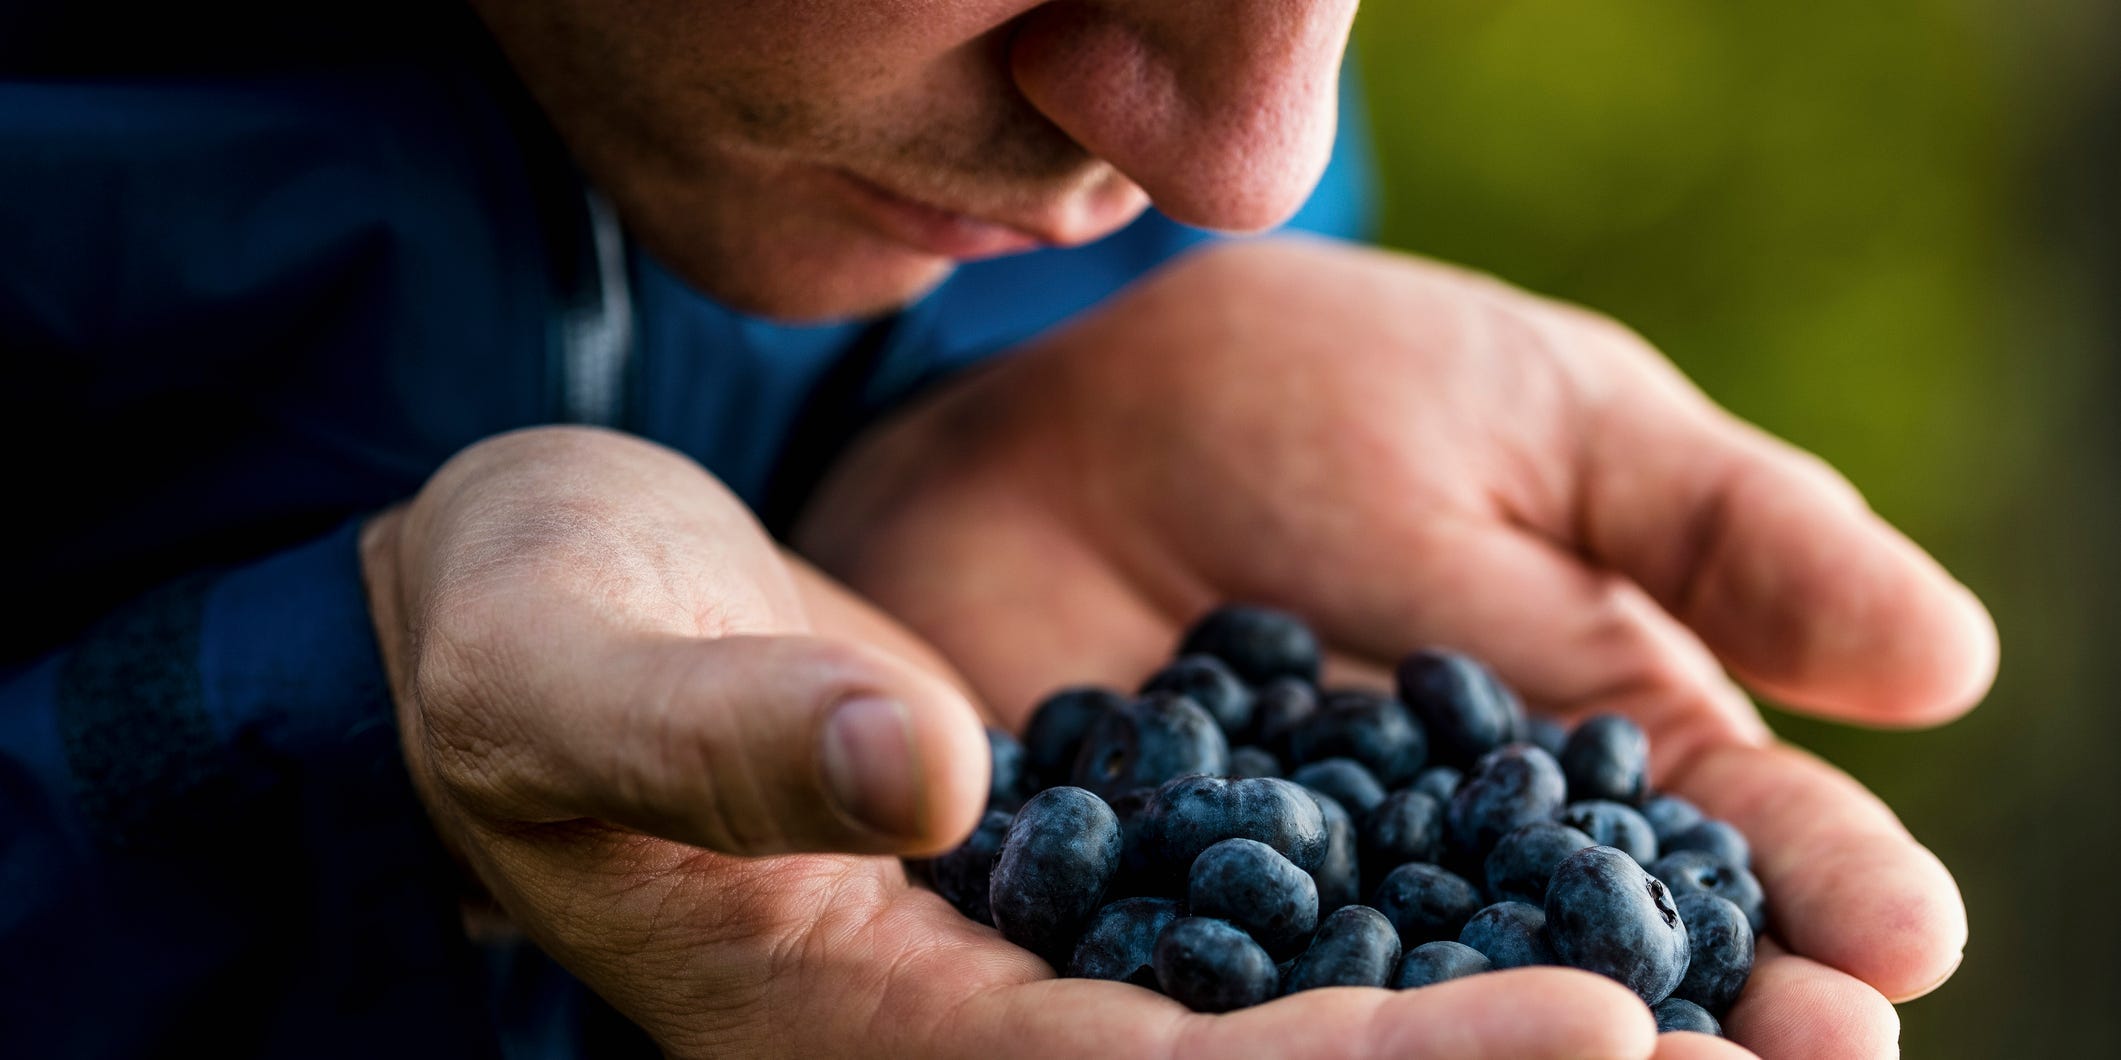 Man holds blueberries in his hands and smells them.